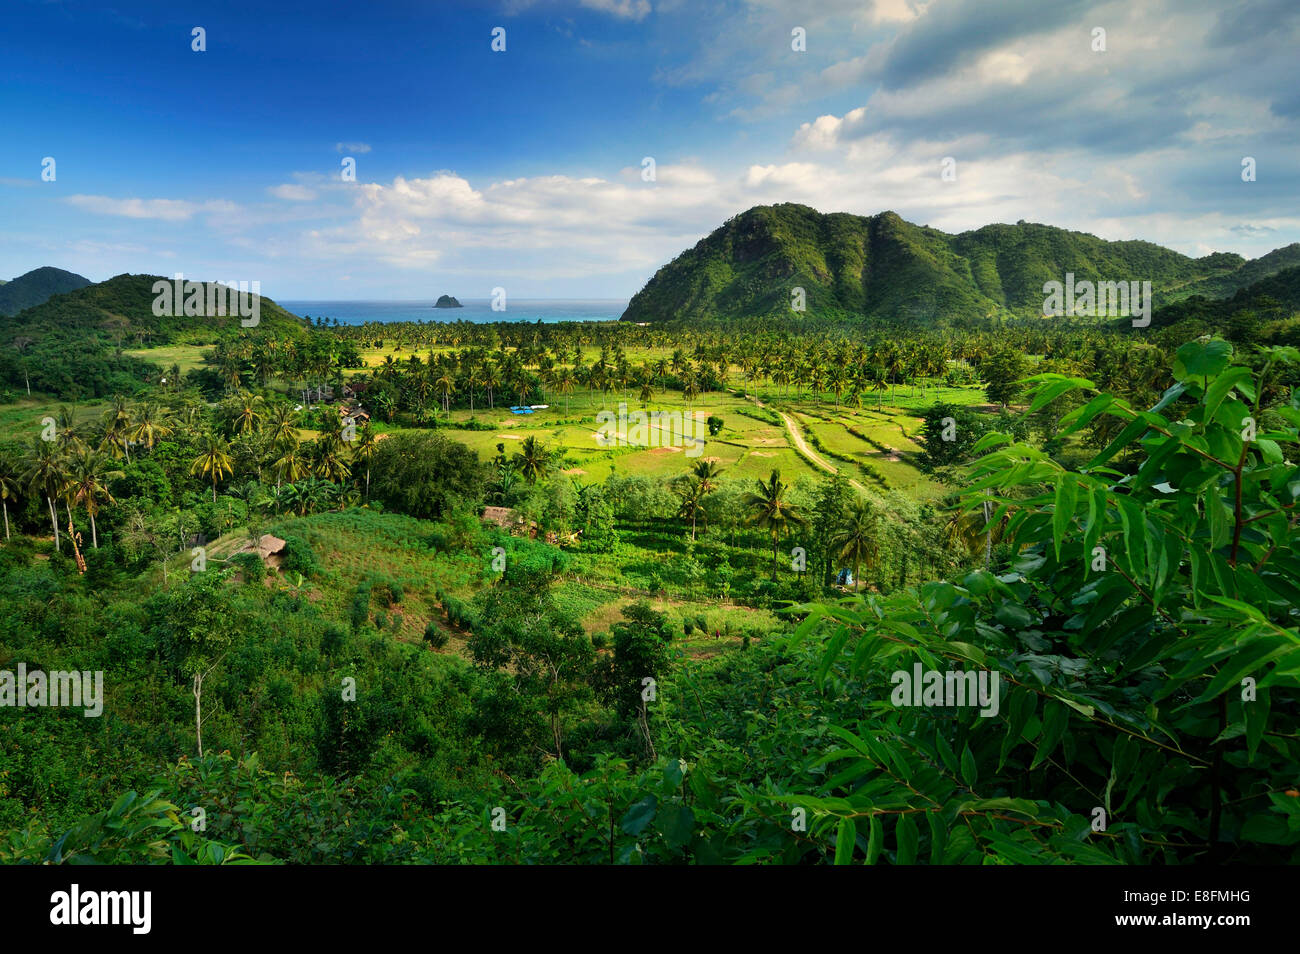 Indonesia, West Nusa Tenggara, Elevated view of farm, sea in background Stock Photo